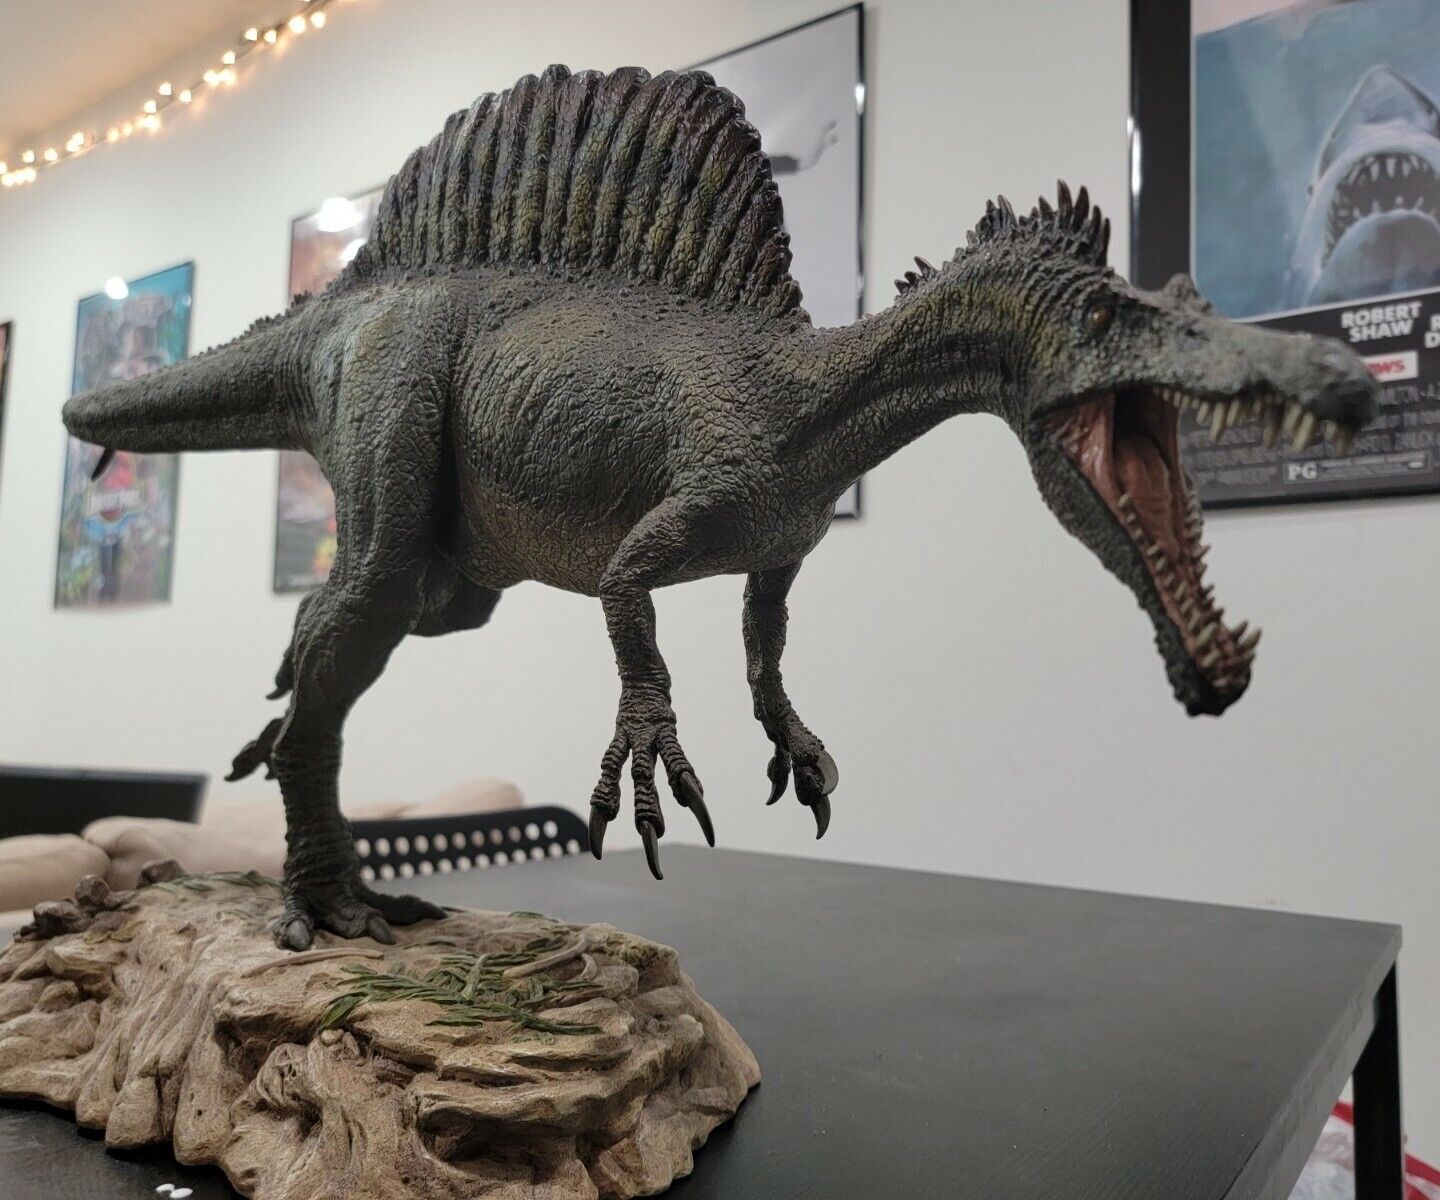 RARE prototype -- / 150 Spinosaurus Dinosauria Statue by Sideshow Collectibles